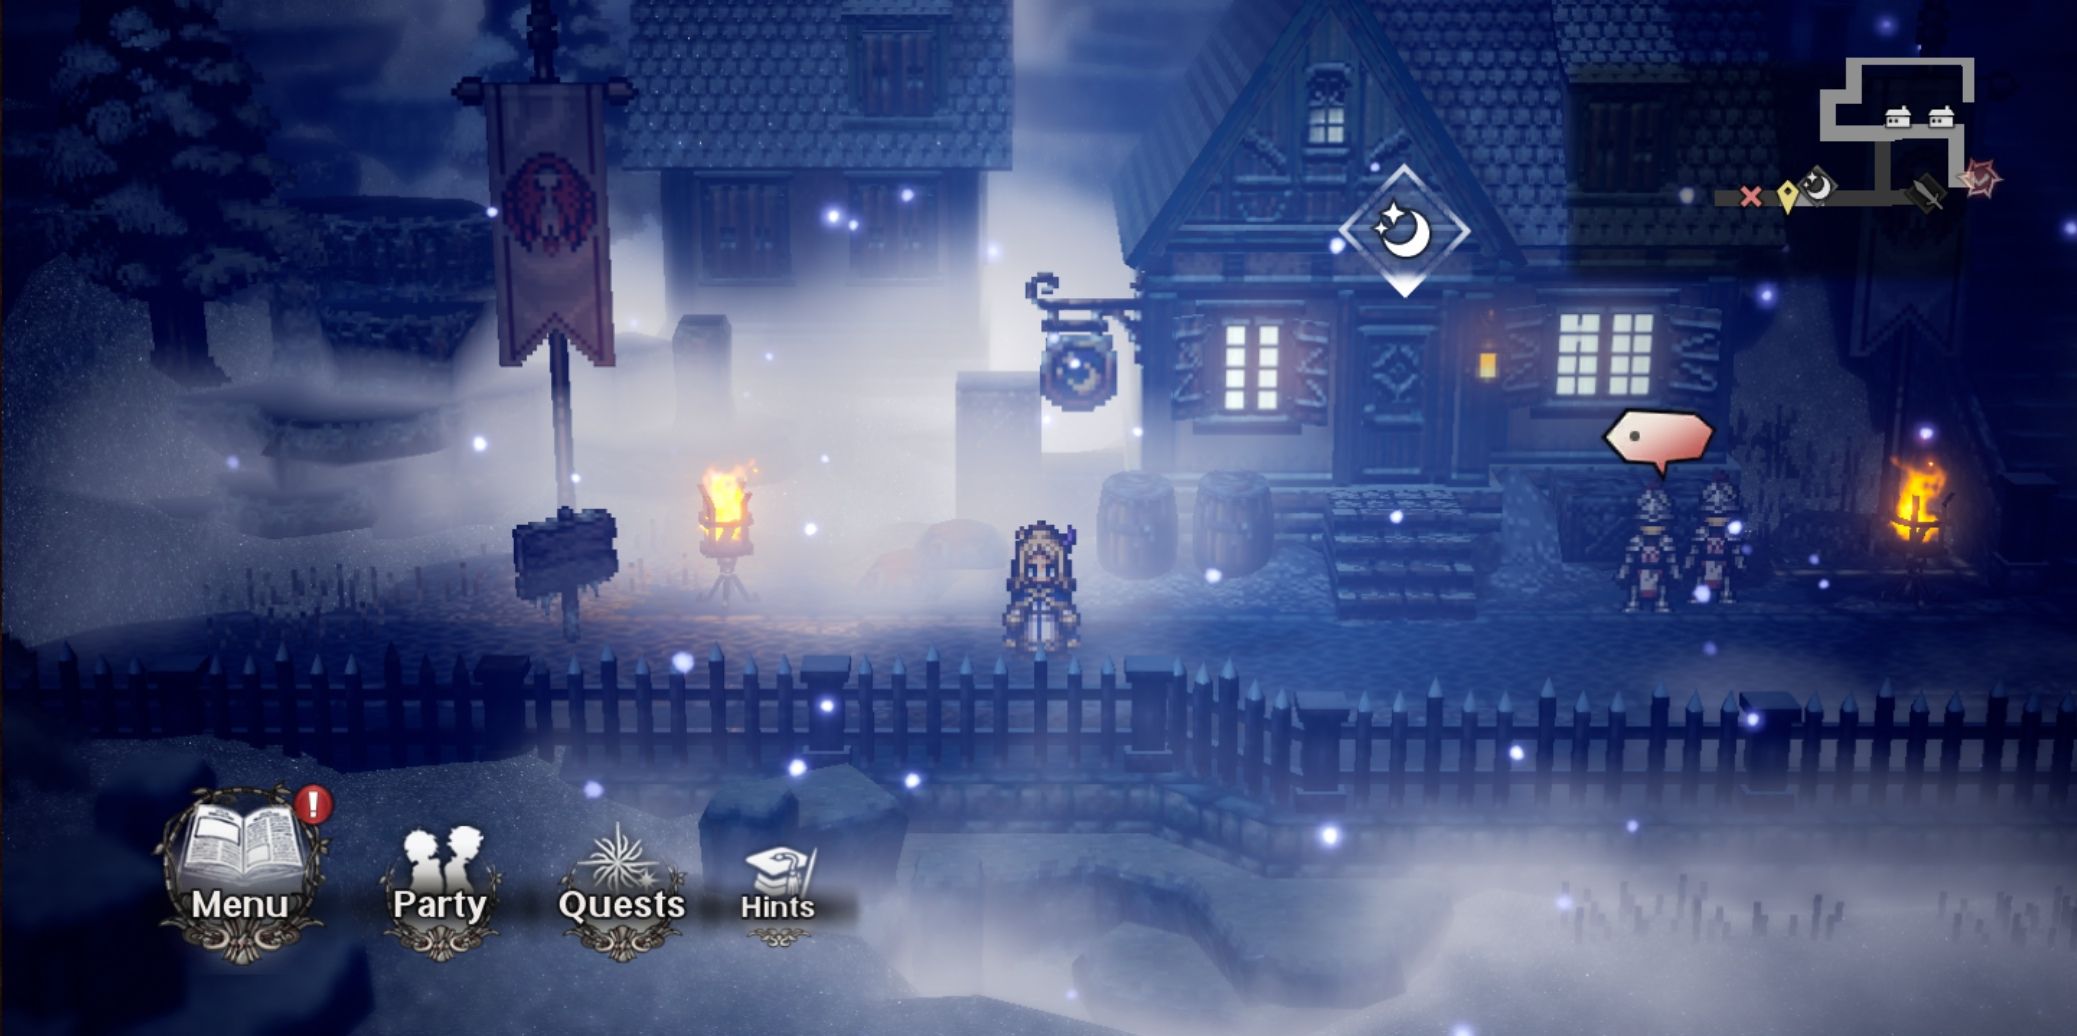 Octopath Traveler: Champions of the Continent will be released in the West  later this year - Polygon